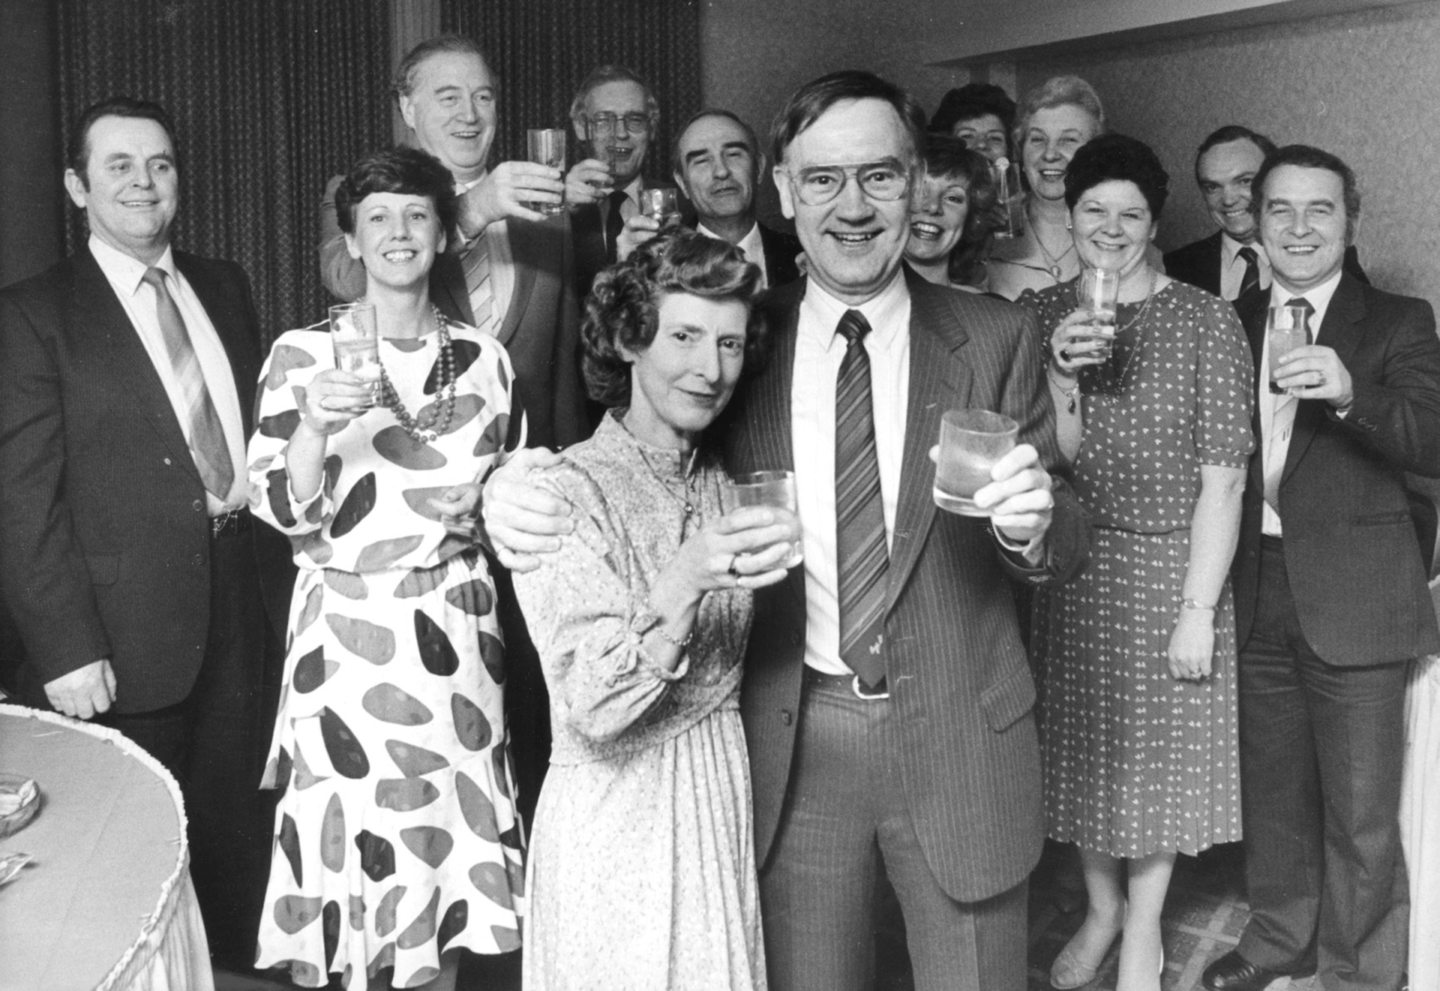 Marks and Spencer warehouse manager Douglas Melvin and his wife Rose making a toast with others behind them